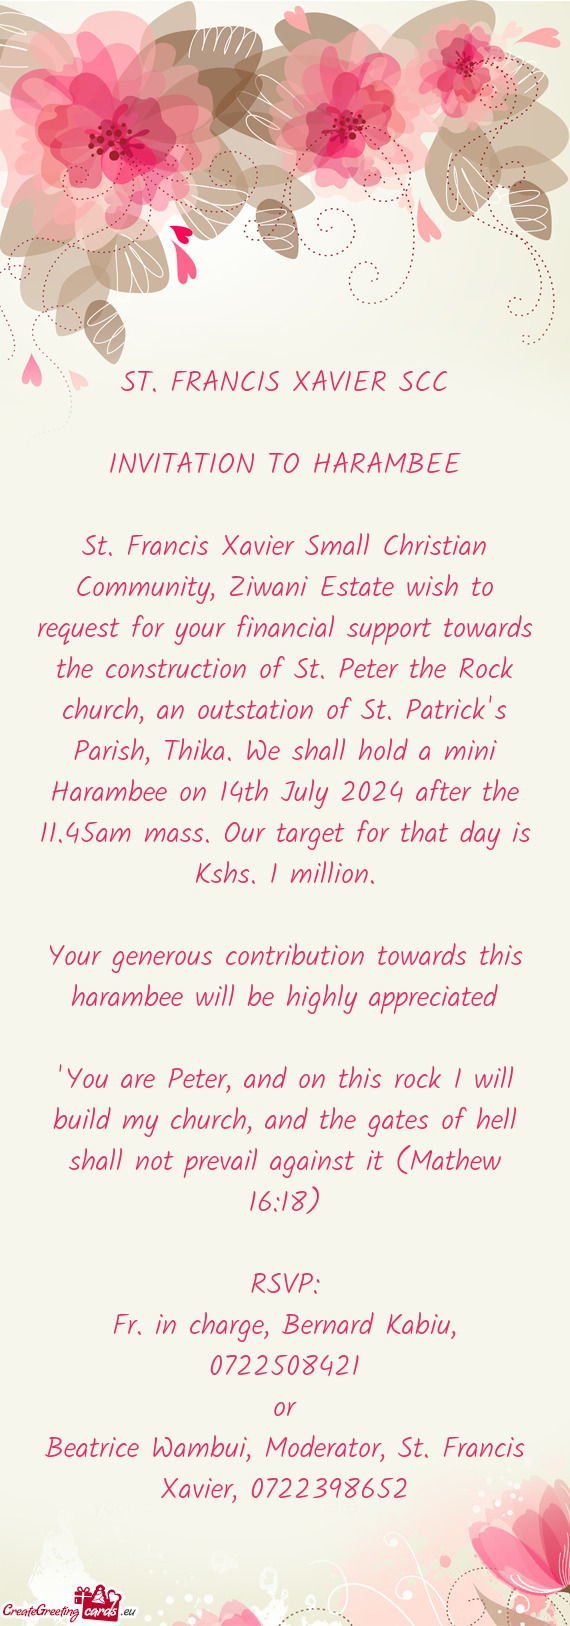 St. Francis Xavier Small Christian Community, Ziwani Estate wish to request for your financial suppo